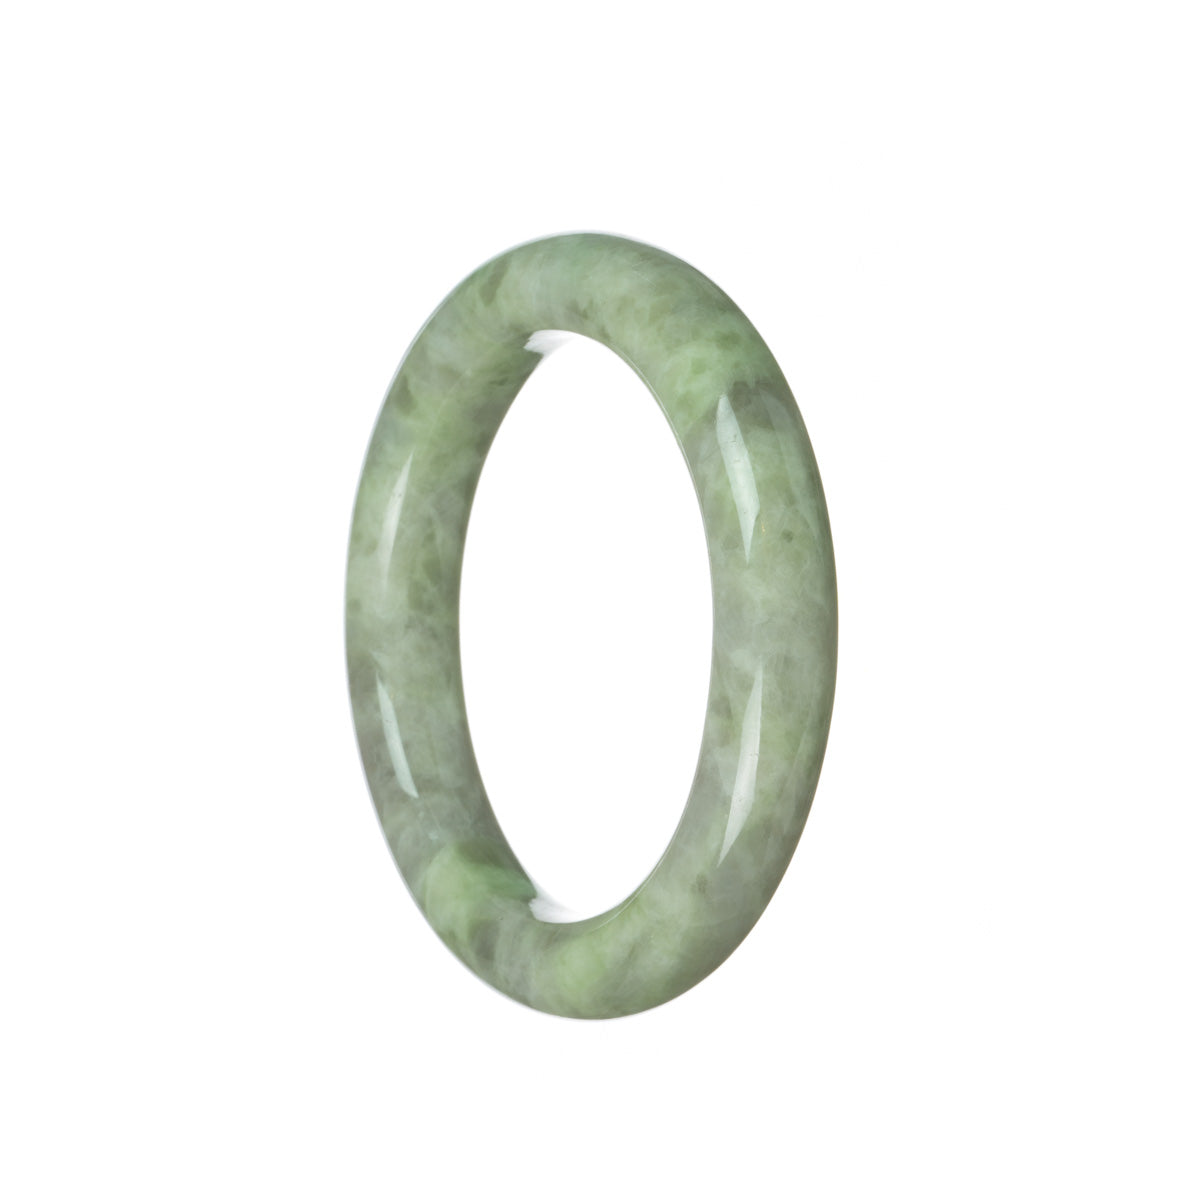 A round green and lavender jade bracelet with certification, measuring 55mm in diameter. Designed by MAYS™.